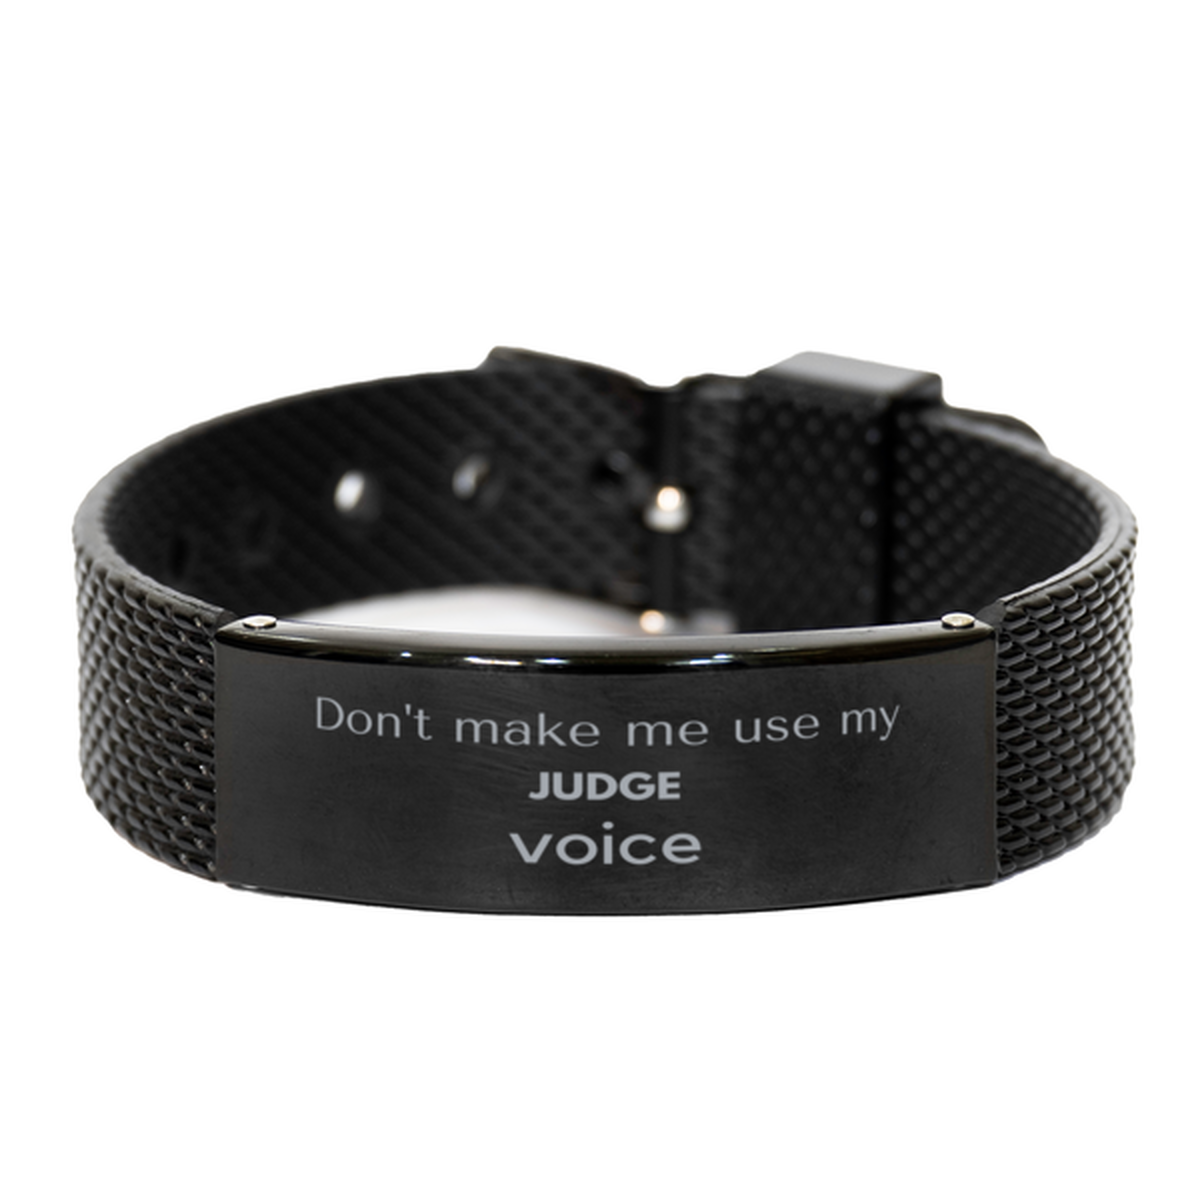 Don't make me use my Judge voice, Sarcasm Judge Gifts, Christmas Judge Black Shark Mesh Bracelet Birthday Unique Gifts For Judge Coworkers, Men, Women, Colleague, Friends